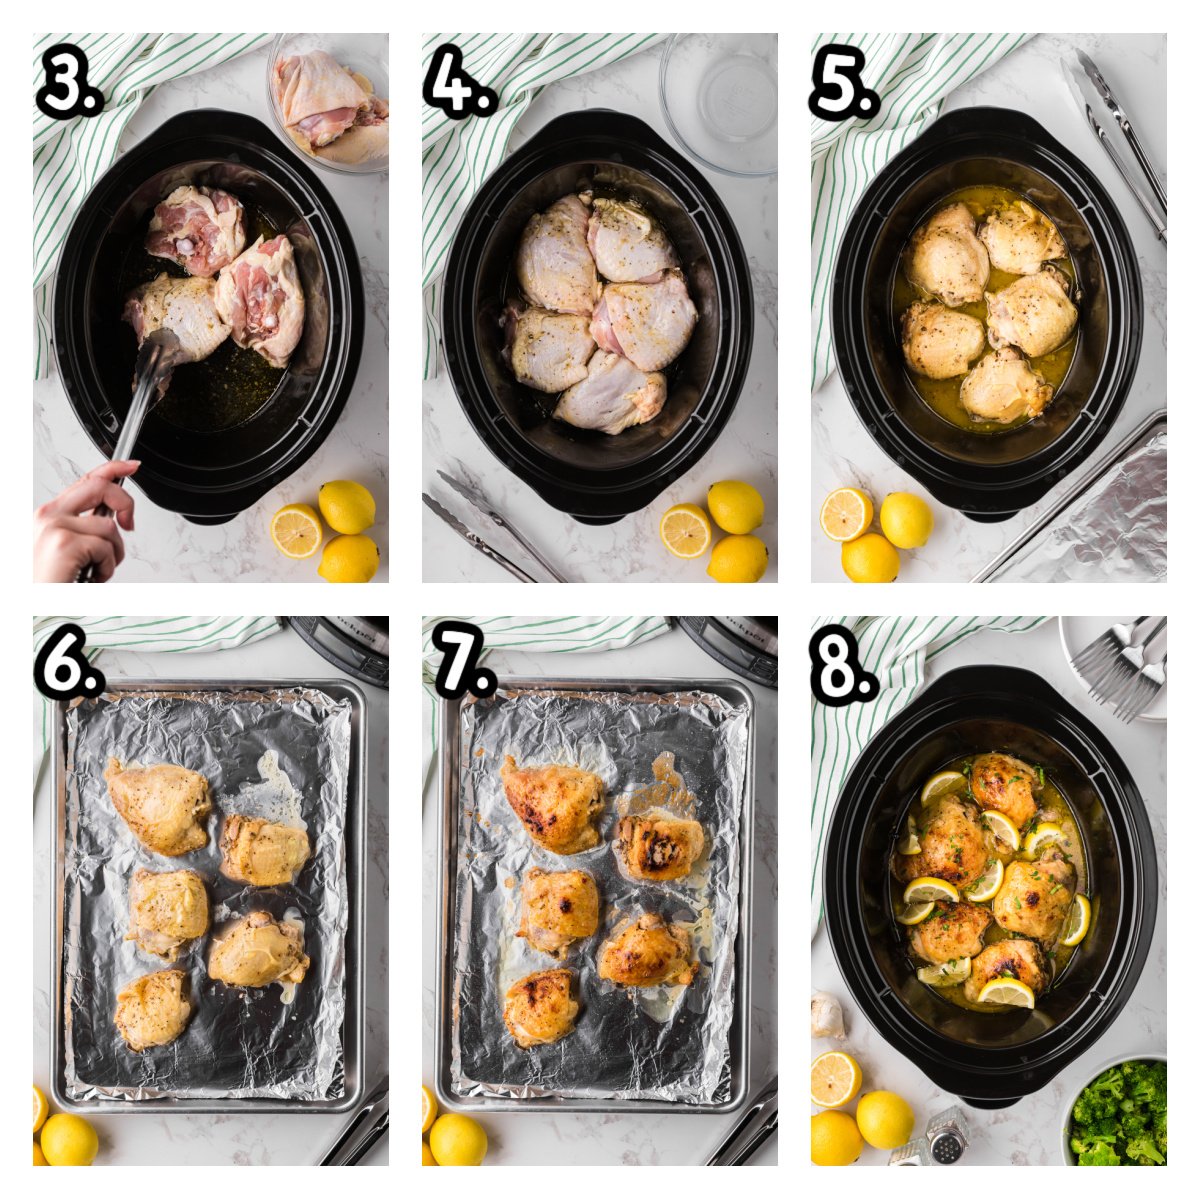 six images showing how to make lemon pepper chicken thighs in a slow cooker.